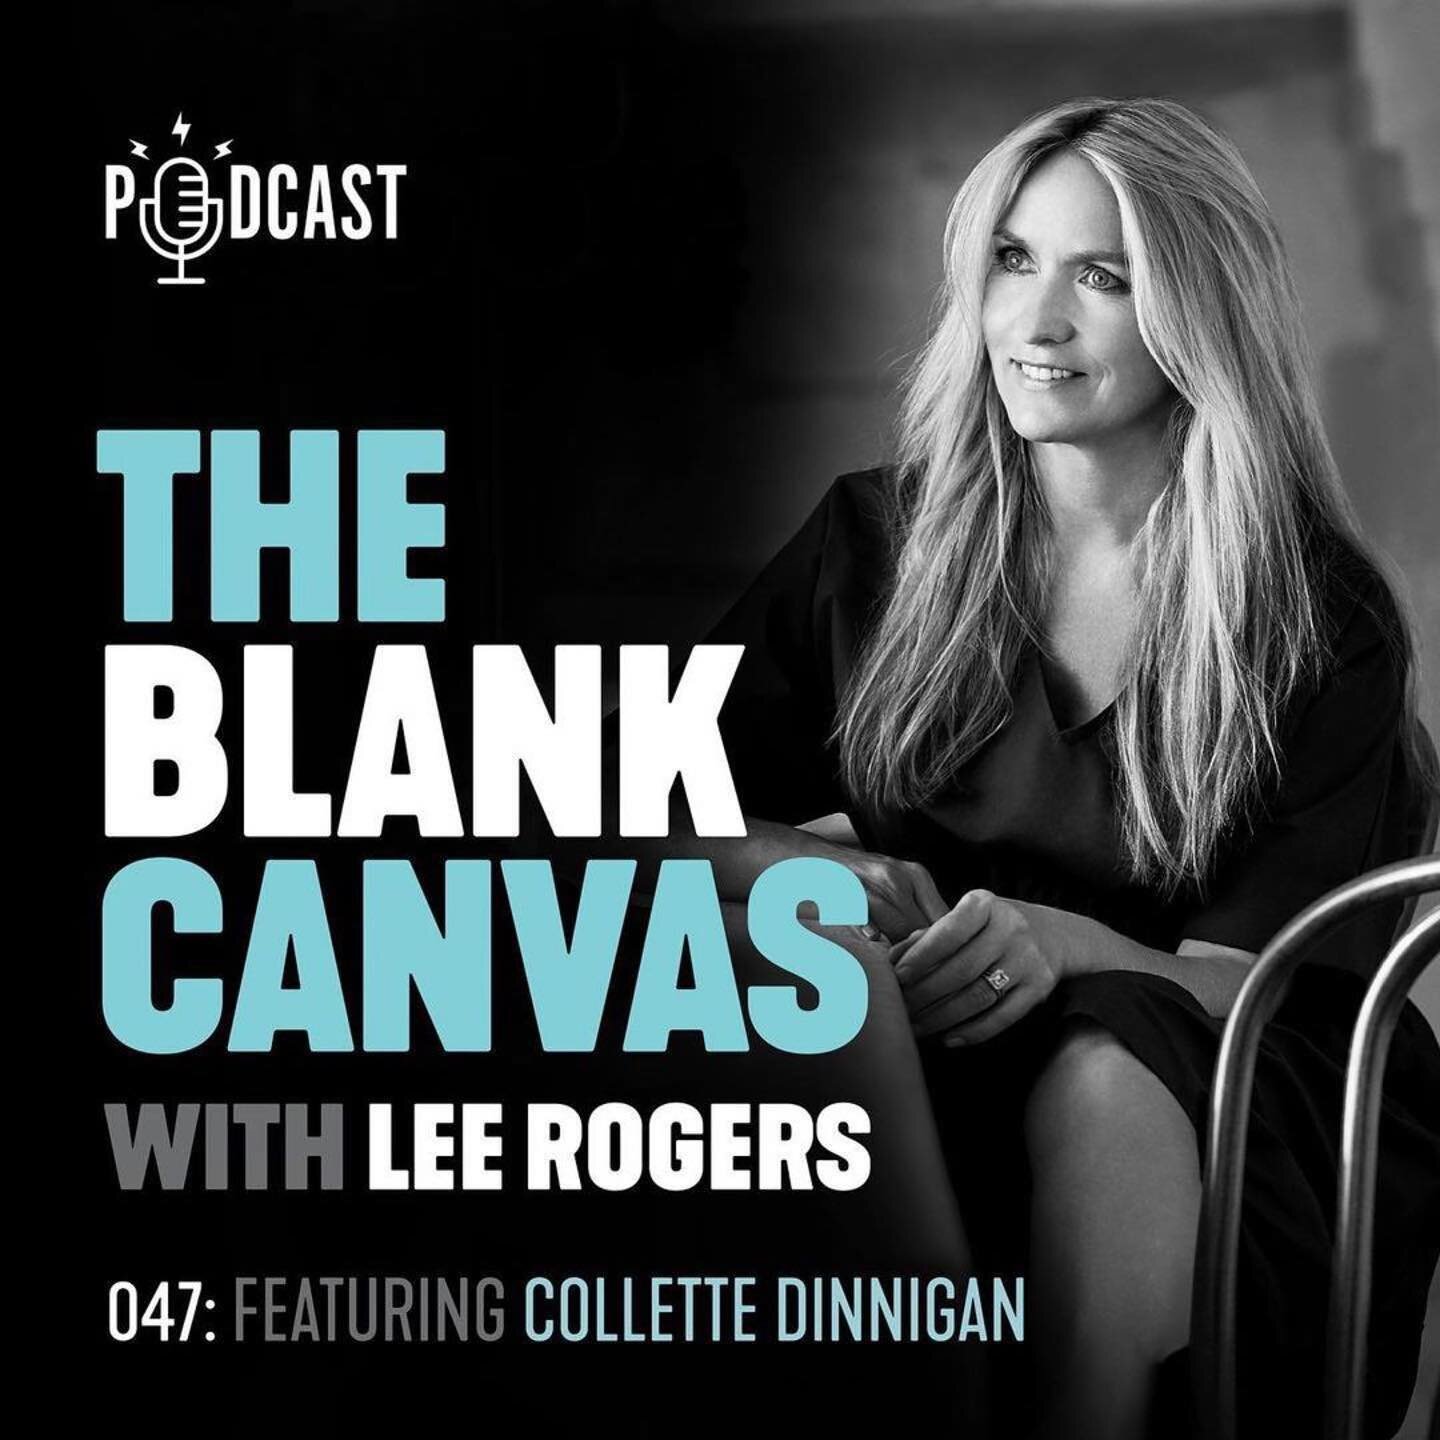 🔲 &ldquo;Force of nature&rdquo; definitely applies to this woman it&rsquo;s an amazing story how Collette got her career off the ground and how fast it exploded internationally, enjoy @collettedinnigan @theblankcanvaspodcast #podcast #trailblazer #l